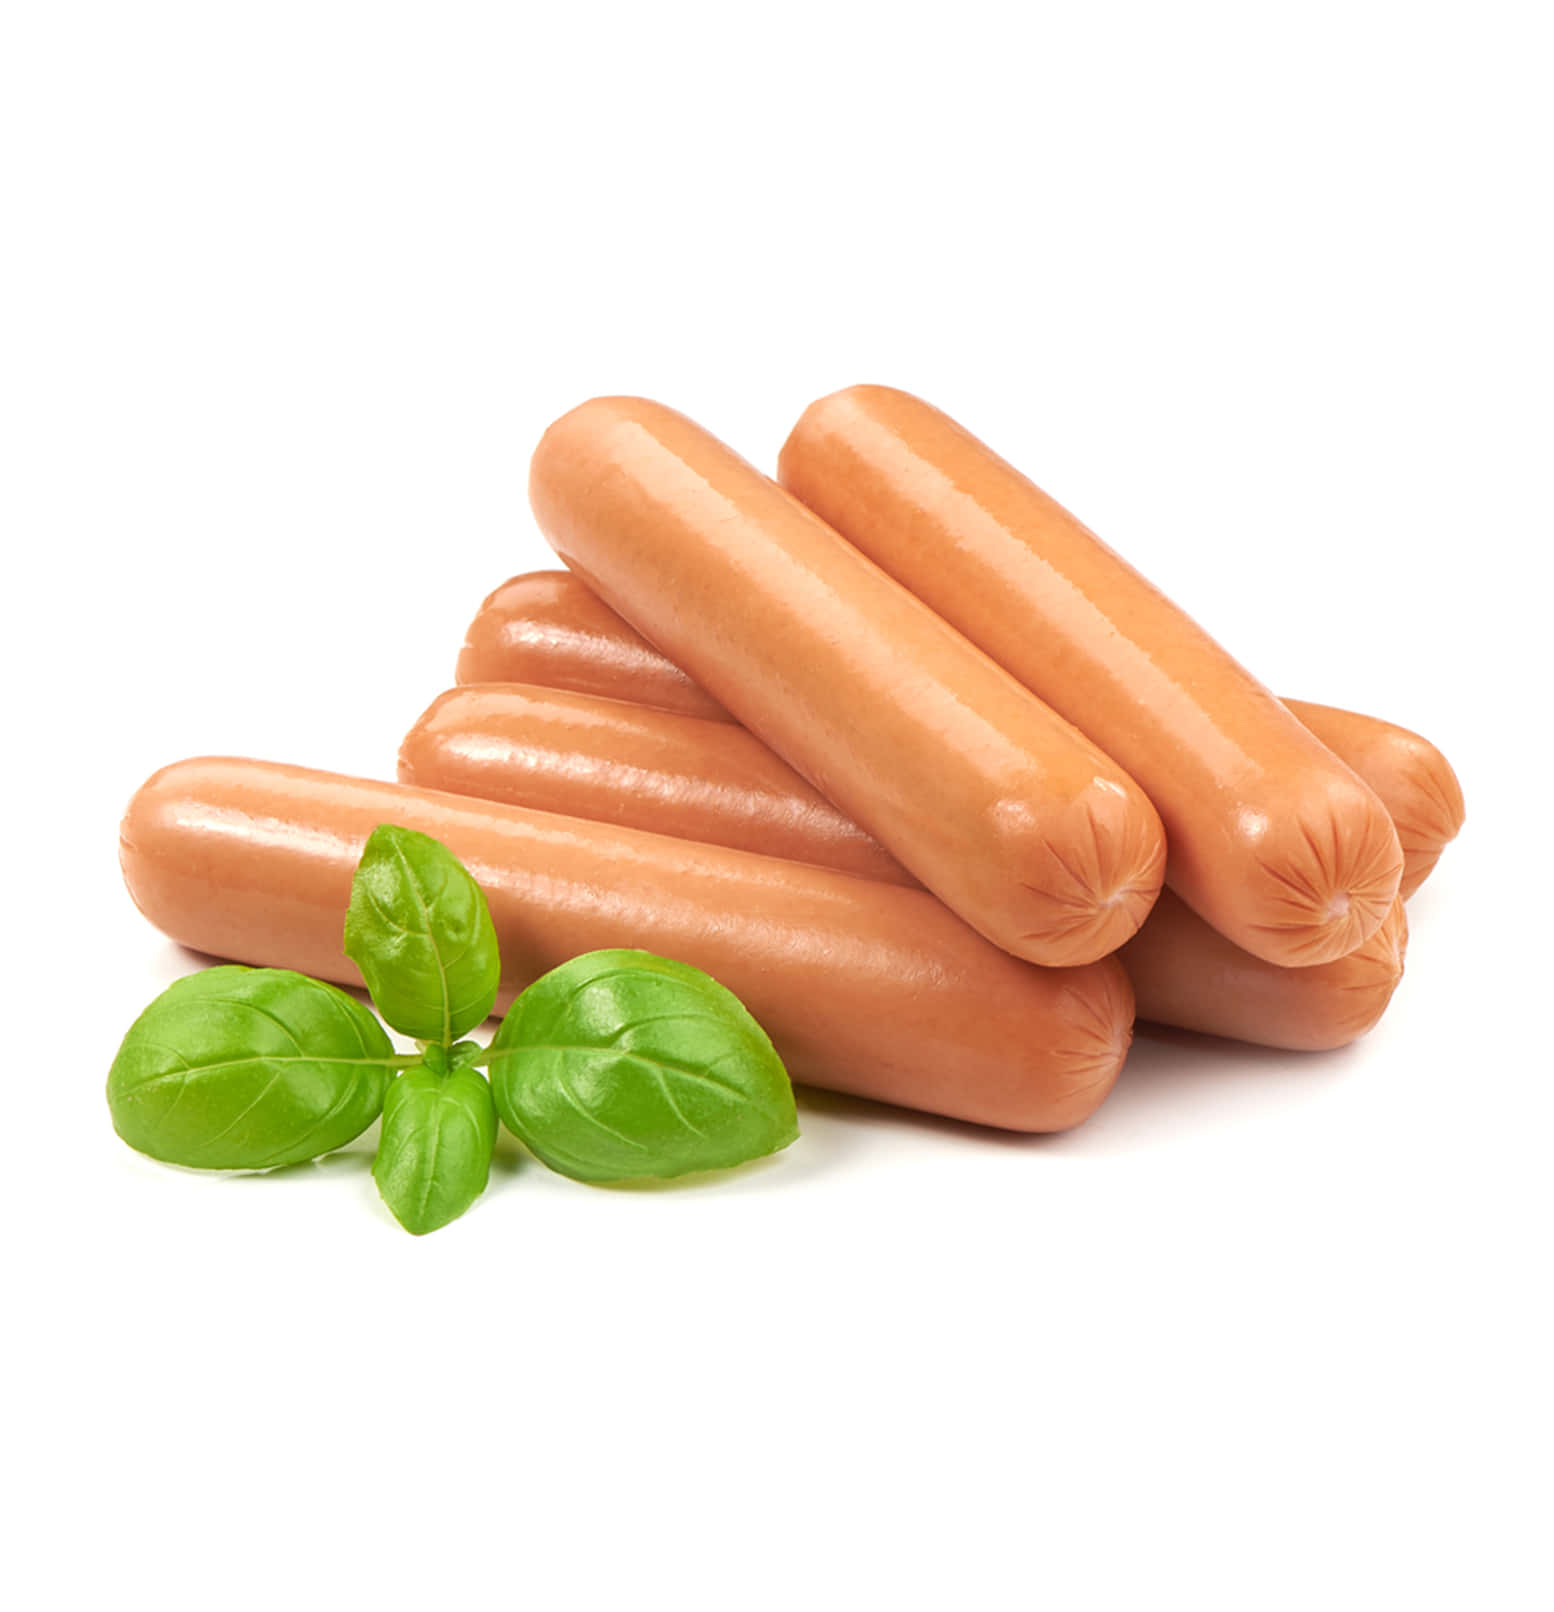 A Pile Of Hot Dogs With Basil Leaves